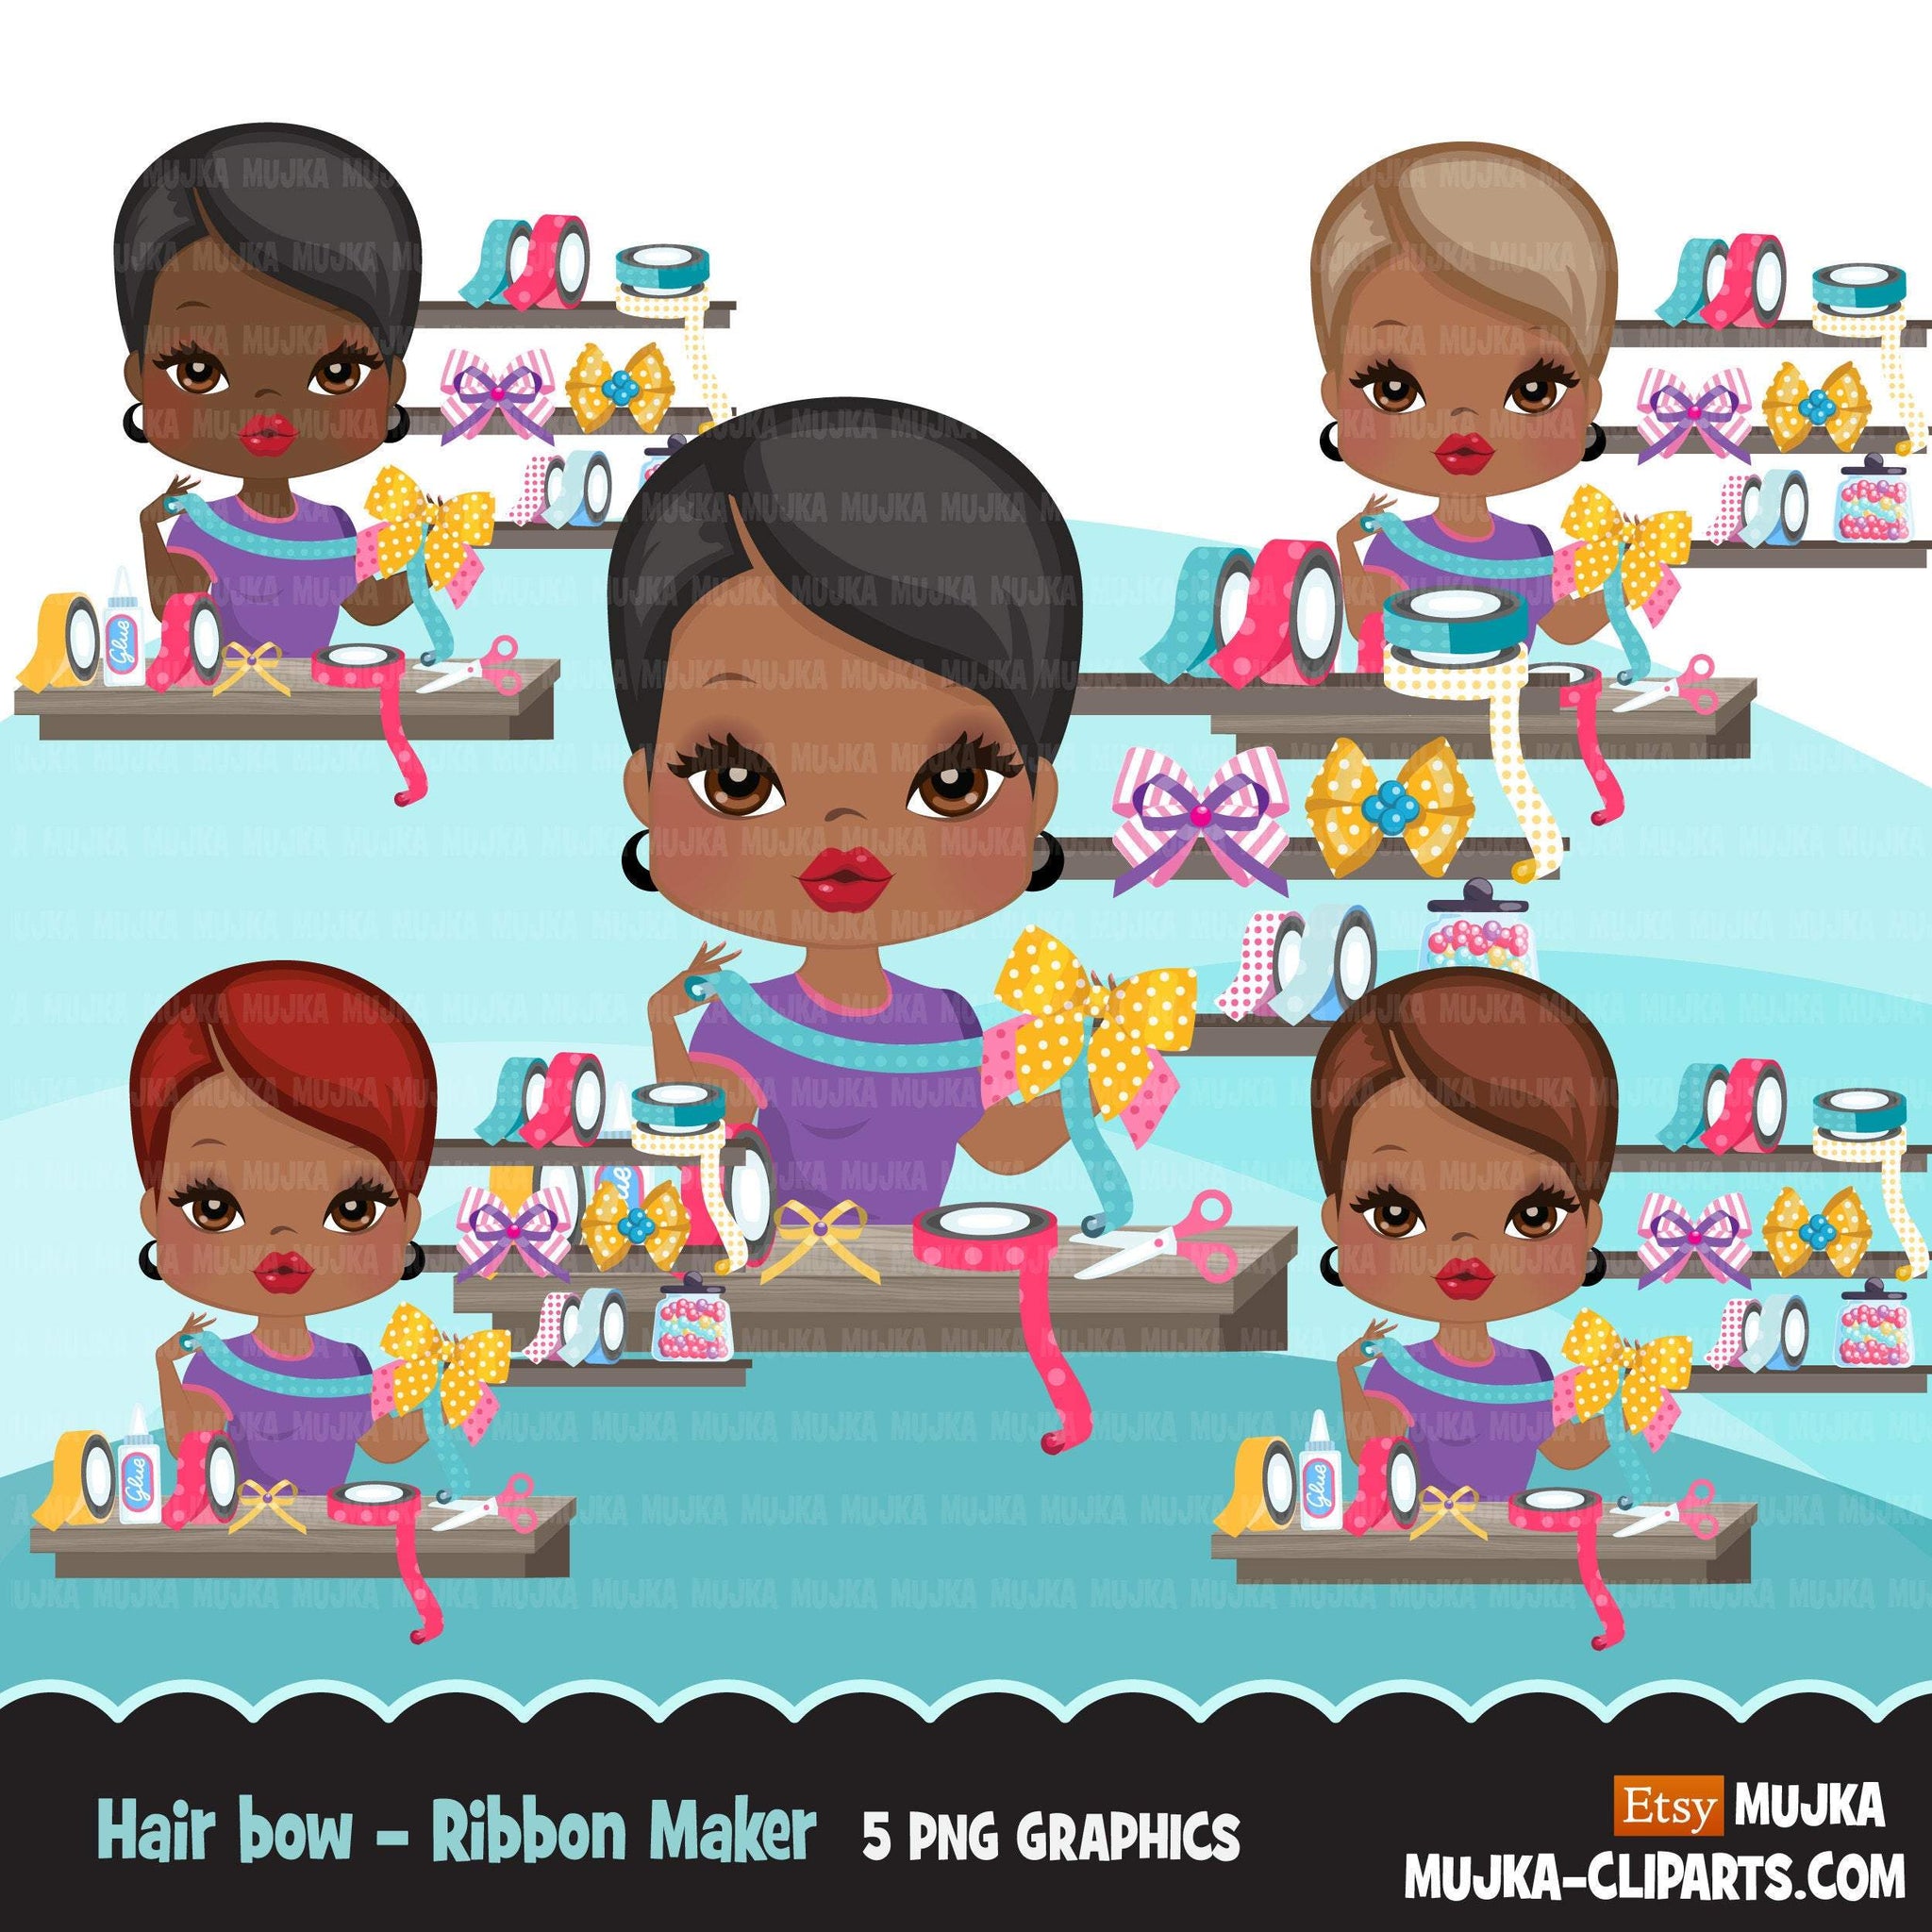 Afro Woman hair bow maker avatar clipart with ribbons, print and cut, bow maker boss black girl clip art